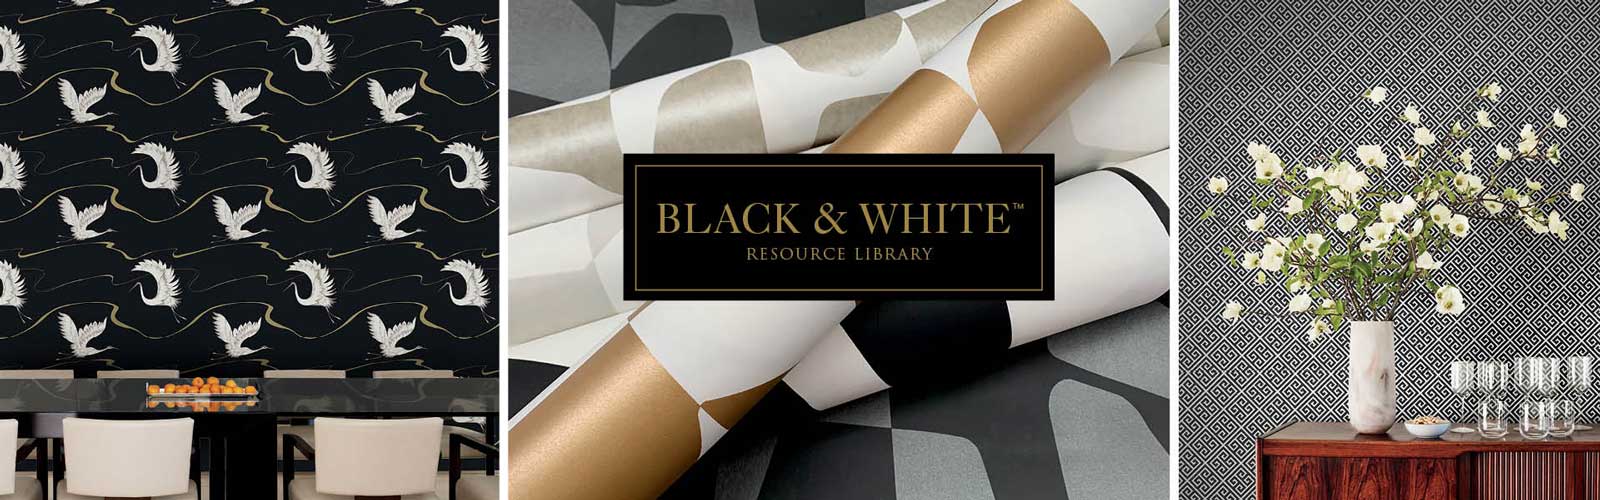 Black and White Resource Library